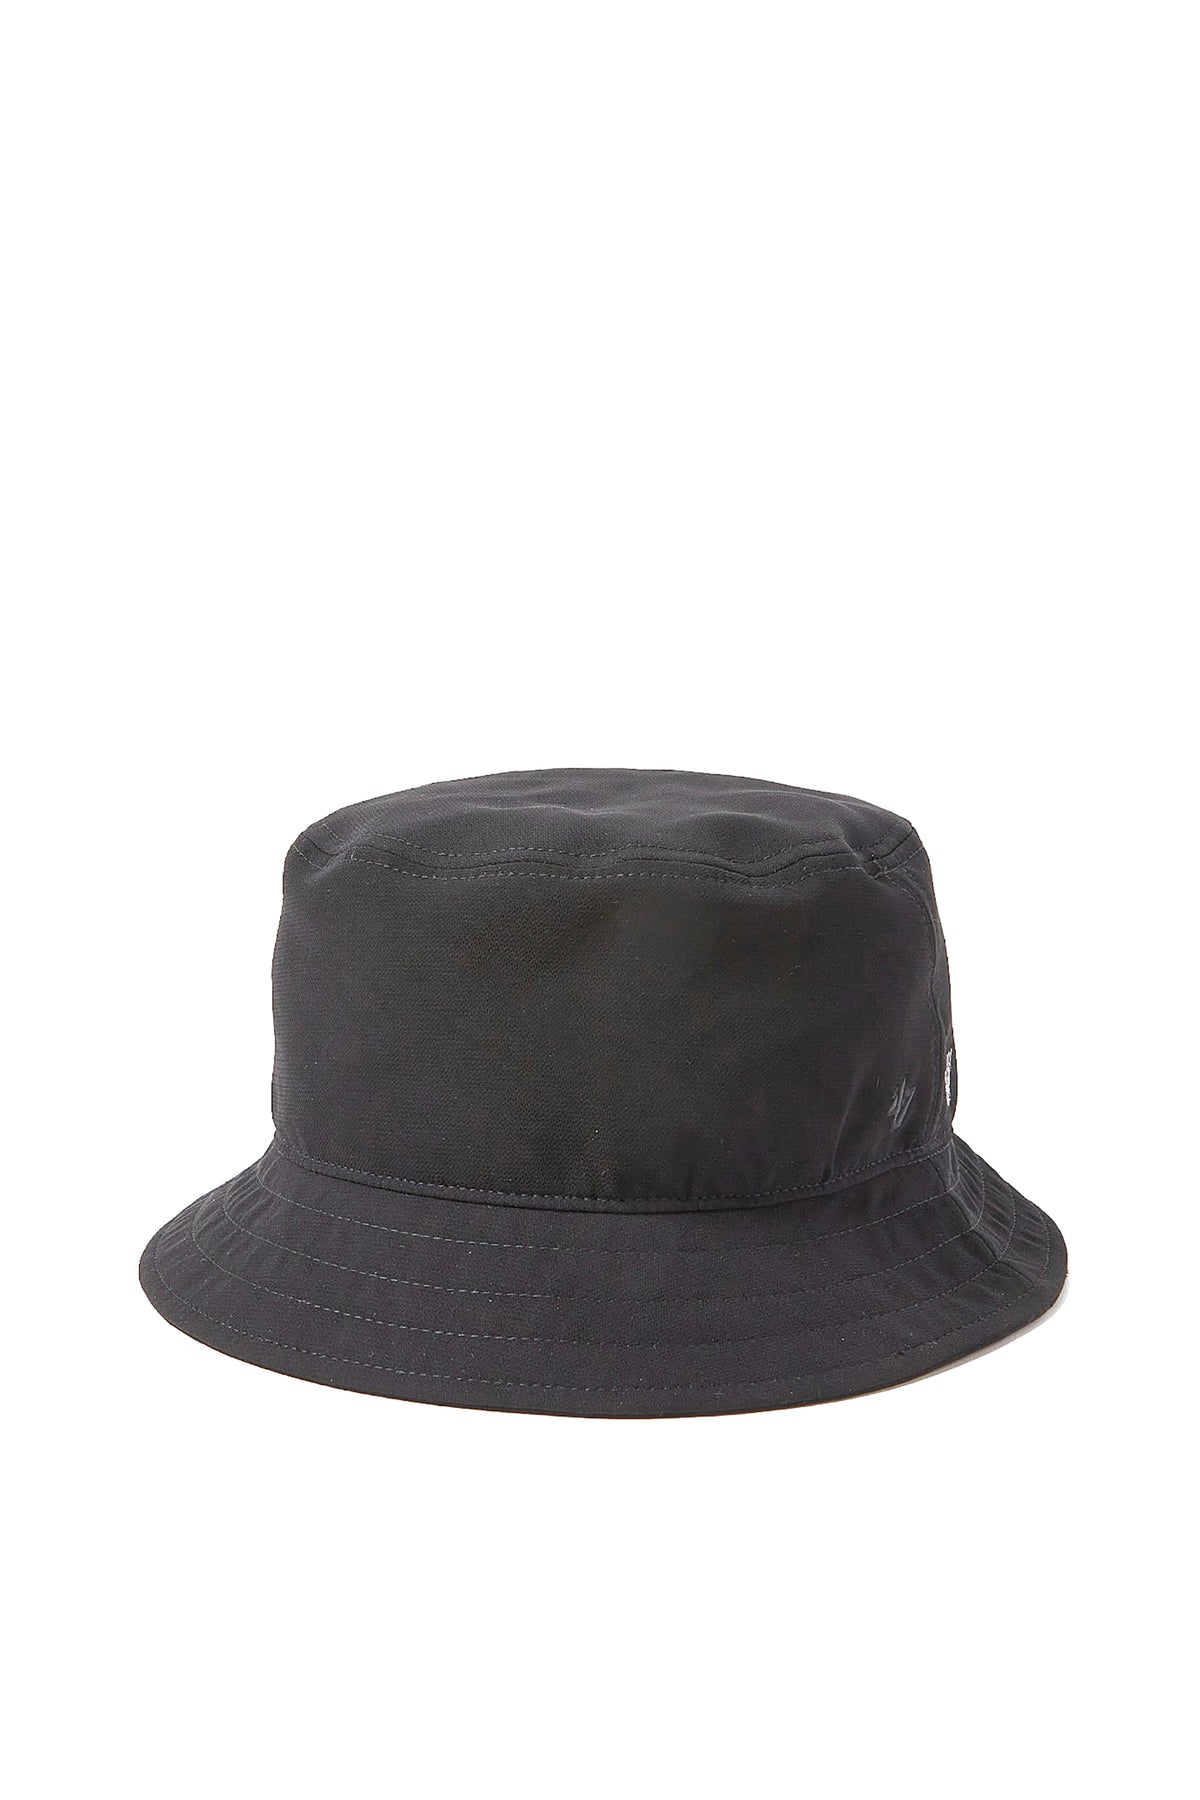 N.HOOLYWOOD COMPILE × ’47 HAT / BLK